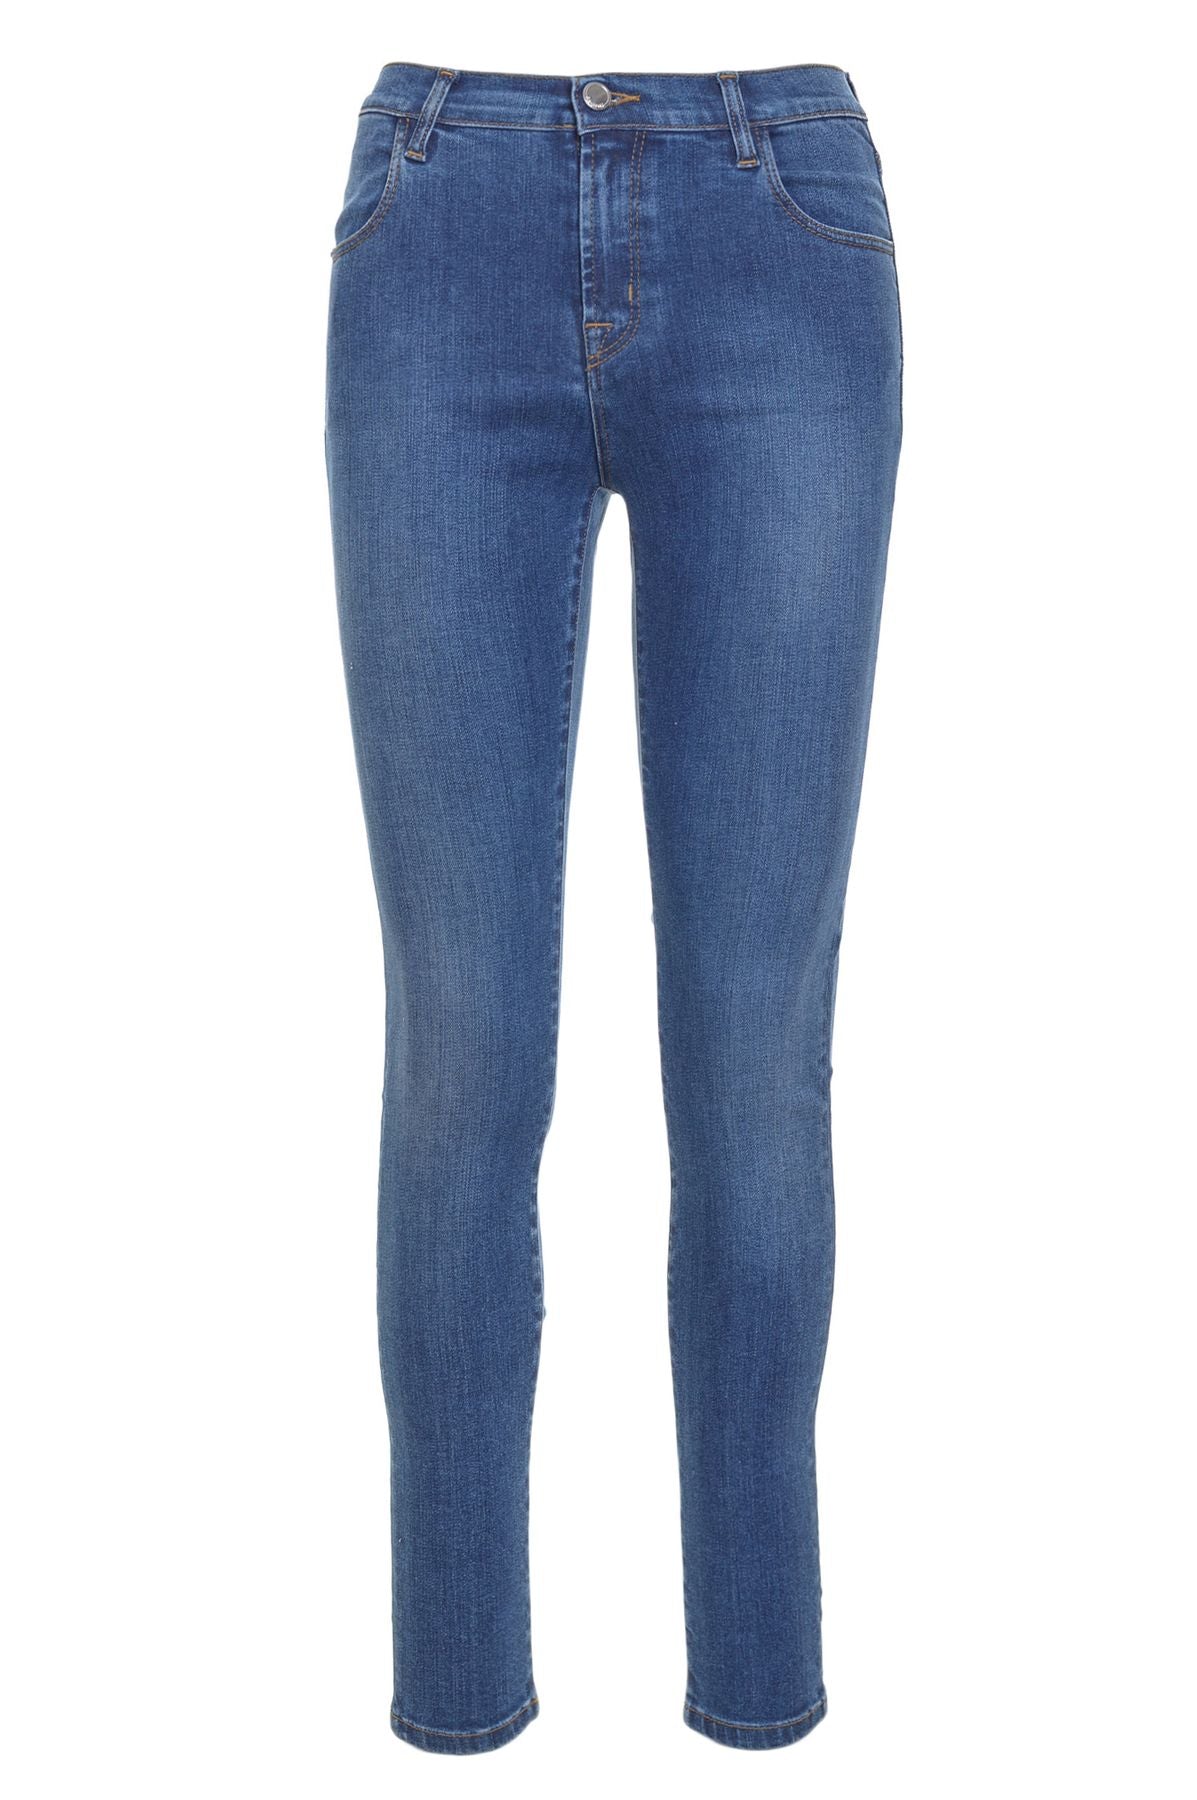 Re-HasH Jeans Autunno/Inverno pant22812x200